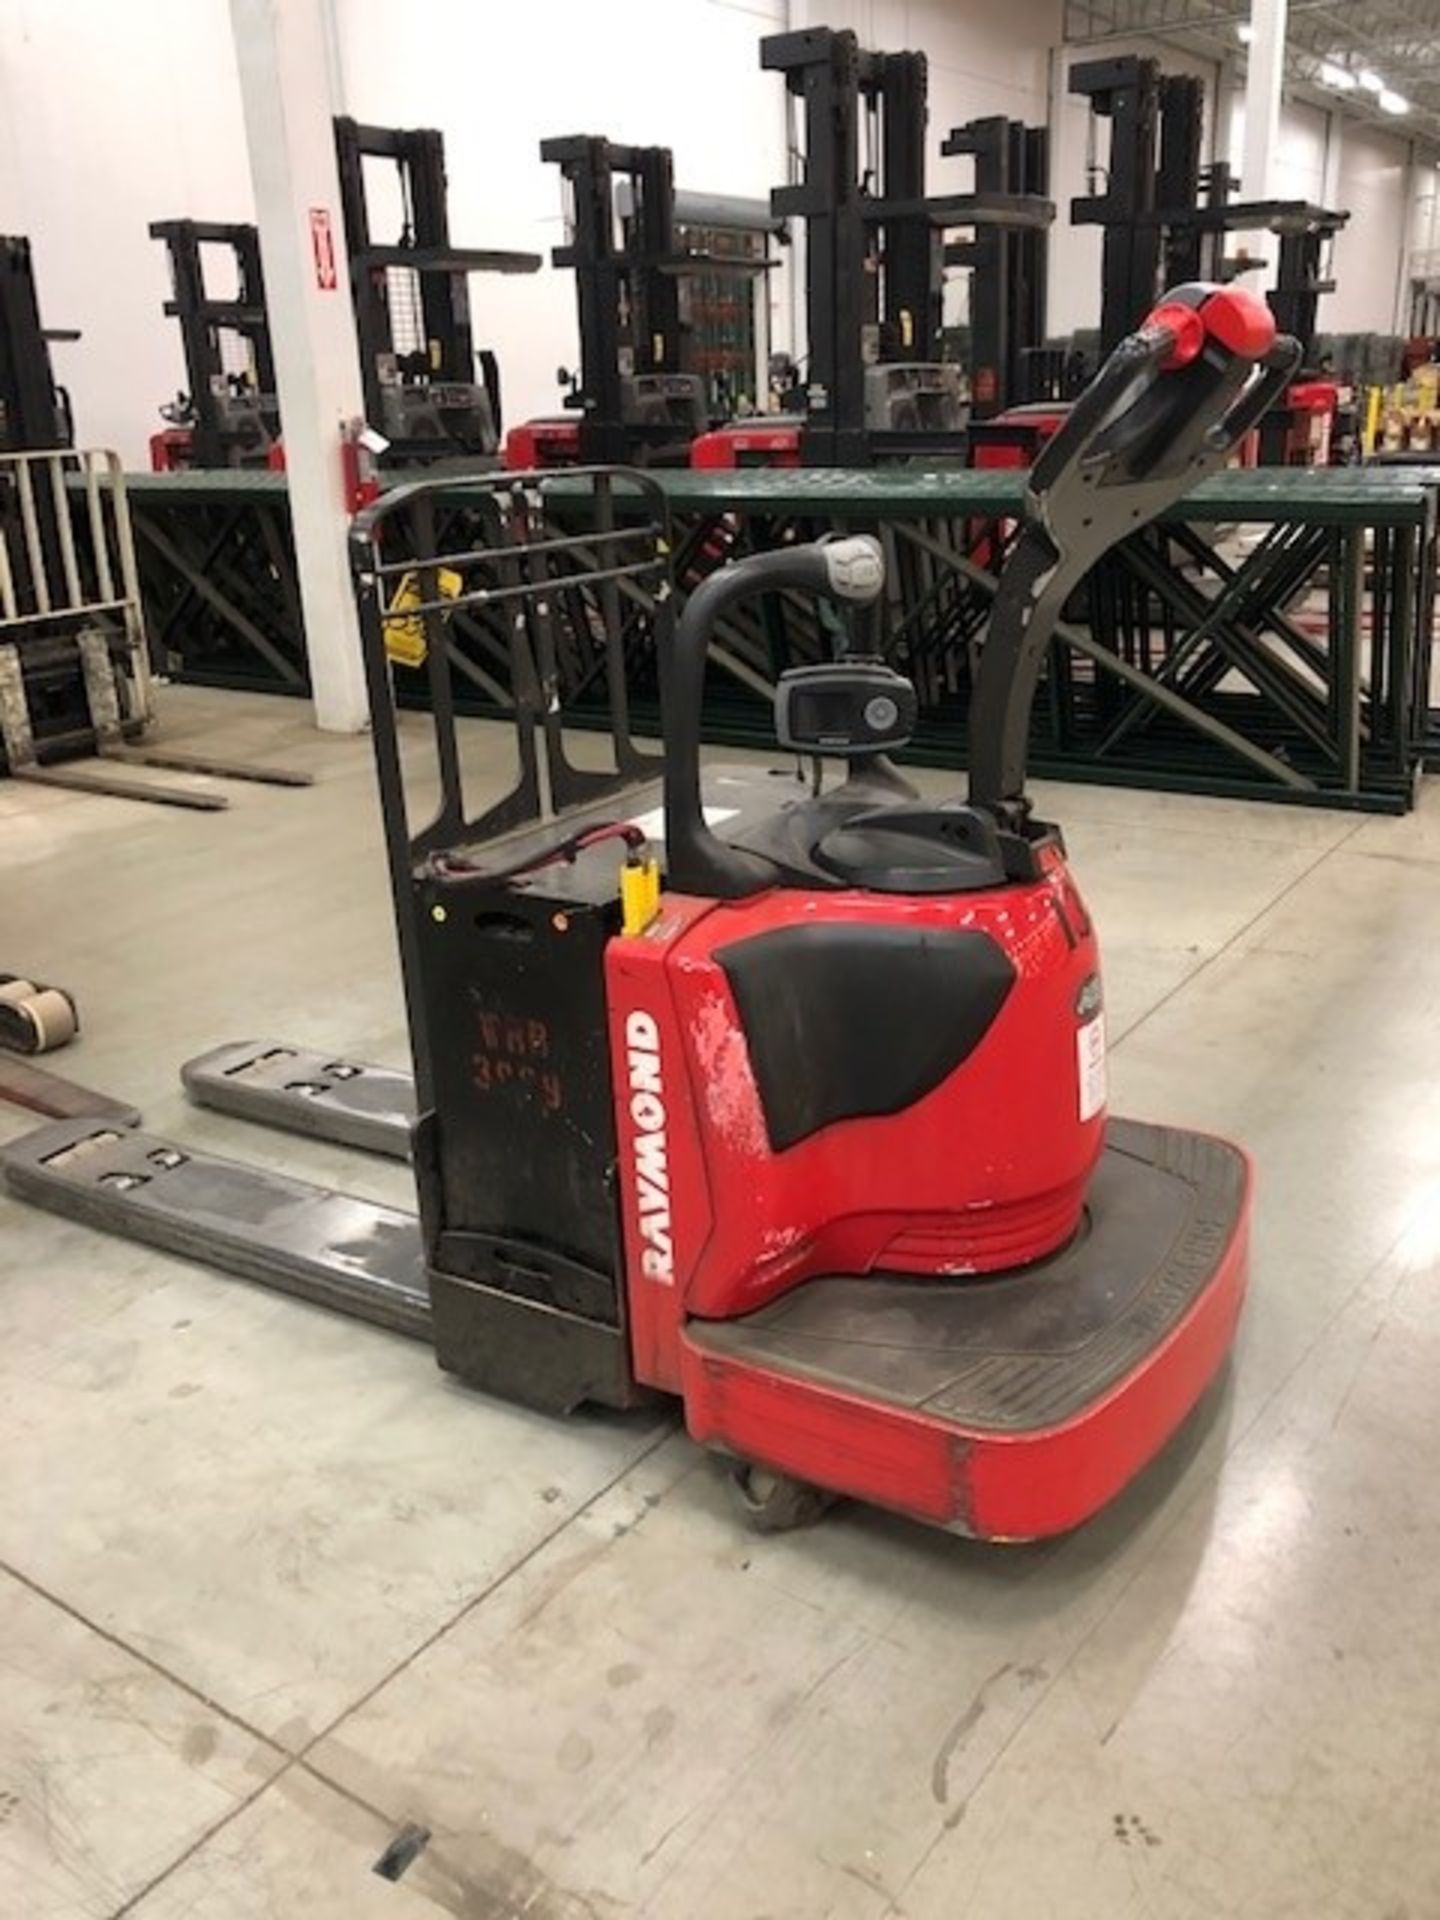 2013 RAYMOND 6,000 LB. CAPACITY ELECTRIC PALLET TRUCK; MODEL 8410, S/N 841-13-17109, WITH IWAREHOUSE - Image 8 of 8